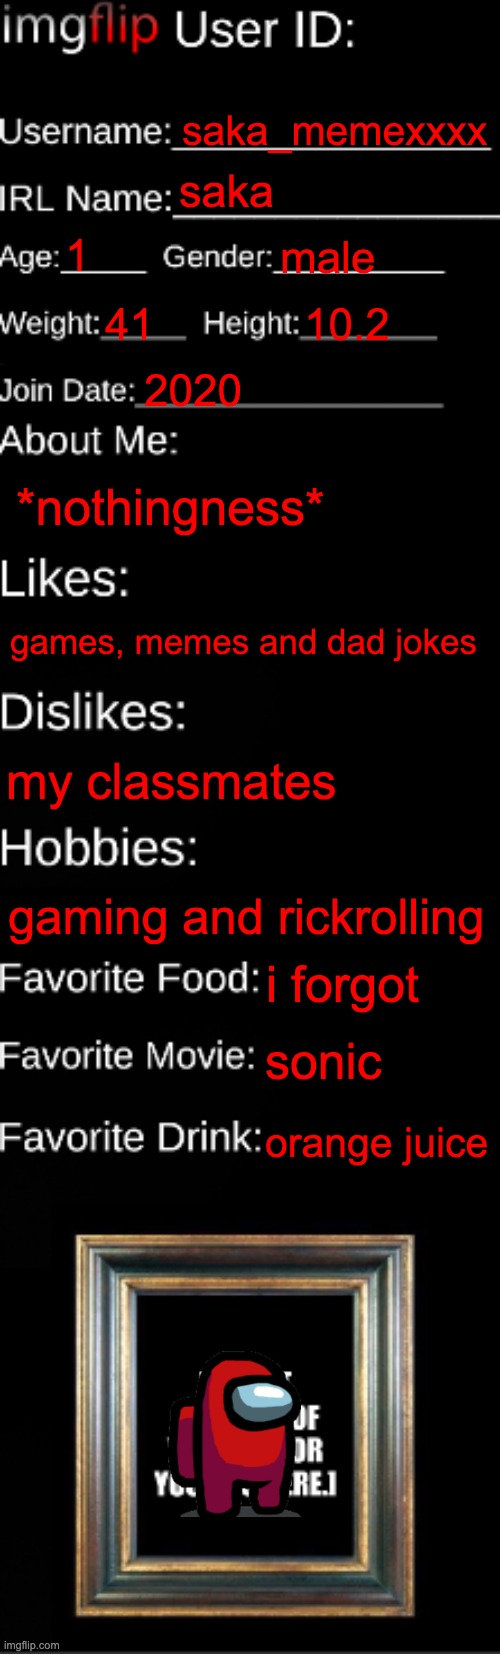 imgflip ID Card | saka_memexxxx; saka; 1; male; 41; 10.2; 2020; *nothingness*; games, memes and dad jokes; my classmates; gaming and rickrolling; i forgot; sonic; orange juice | image tagged in why are you reading this,stop reading the tags,i said stop,your gonna have a bad time,never gonna give you up | made w/ Imgflip meme maker